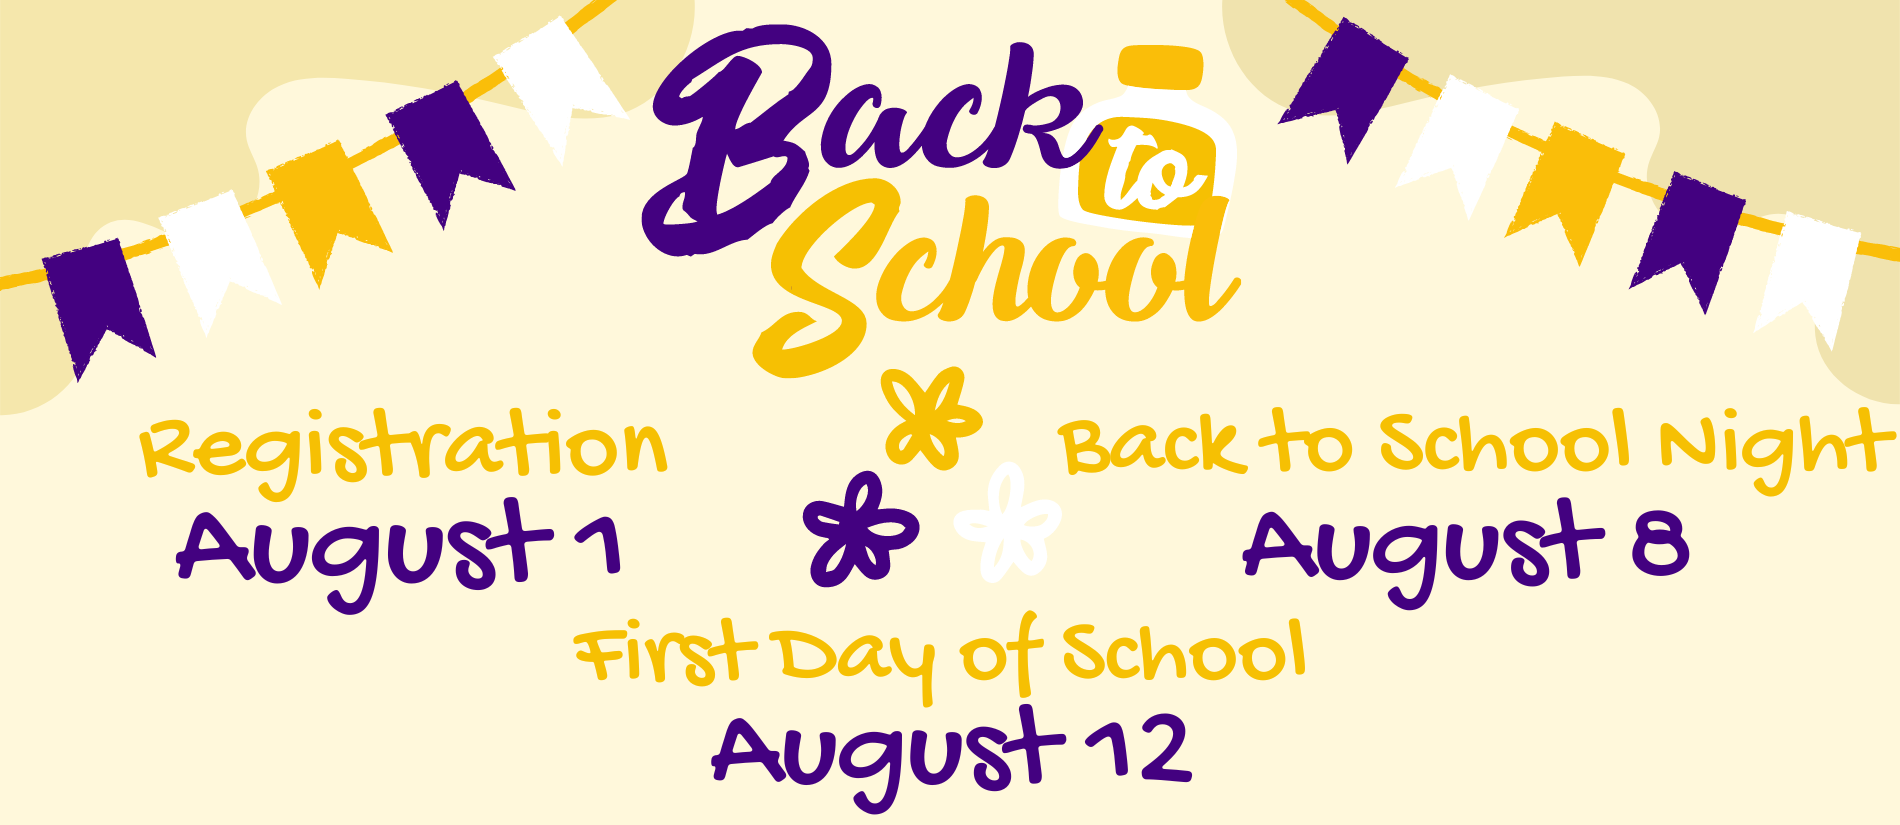 Back to School - Registration August 1, Back to School Night August 8,  First Day of School August 12